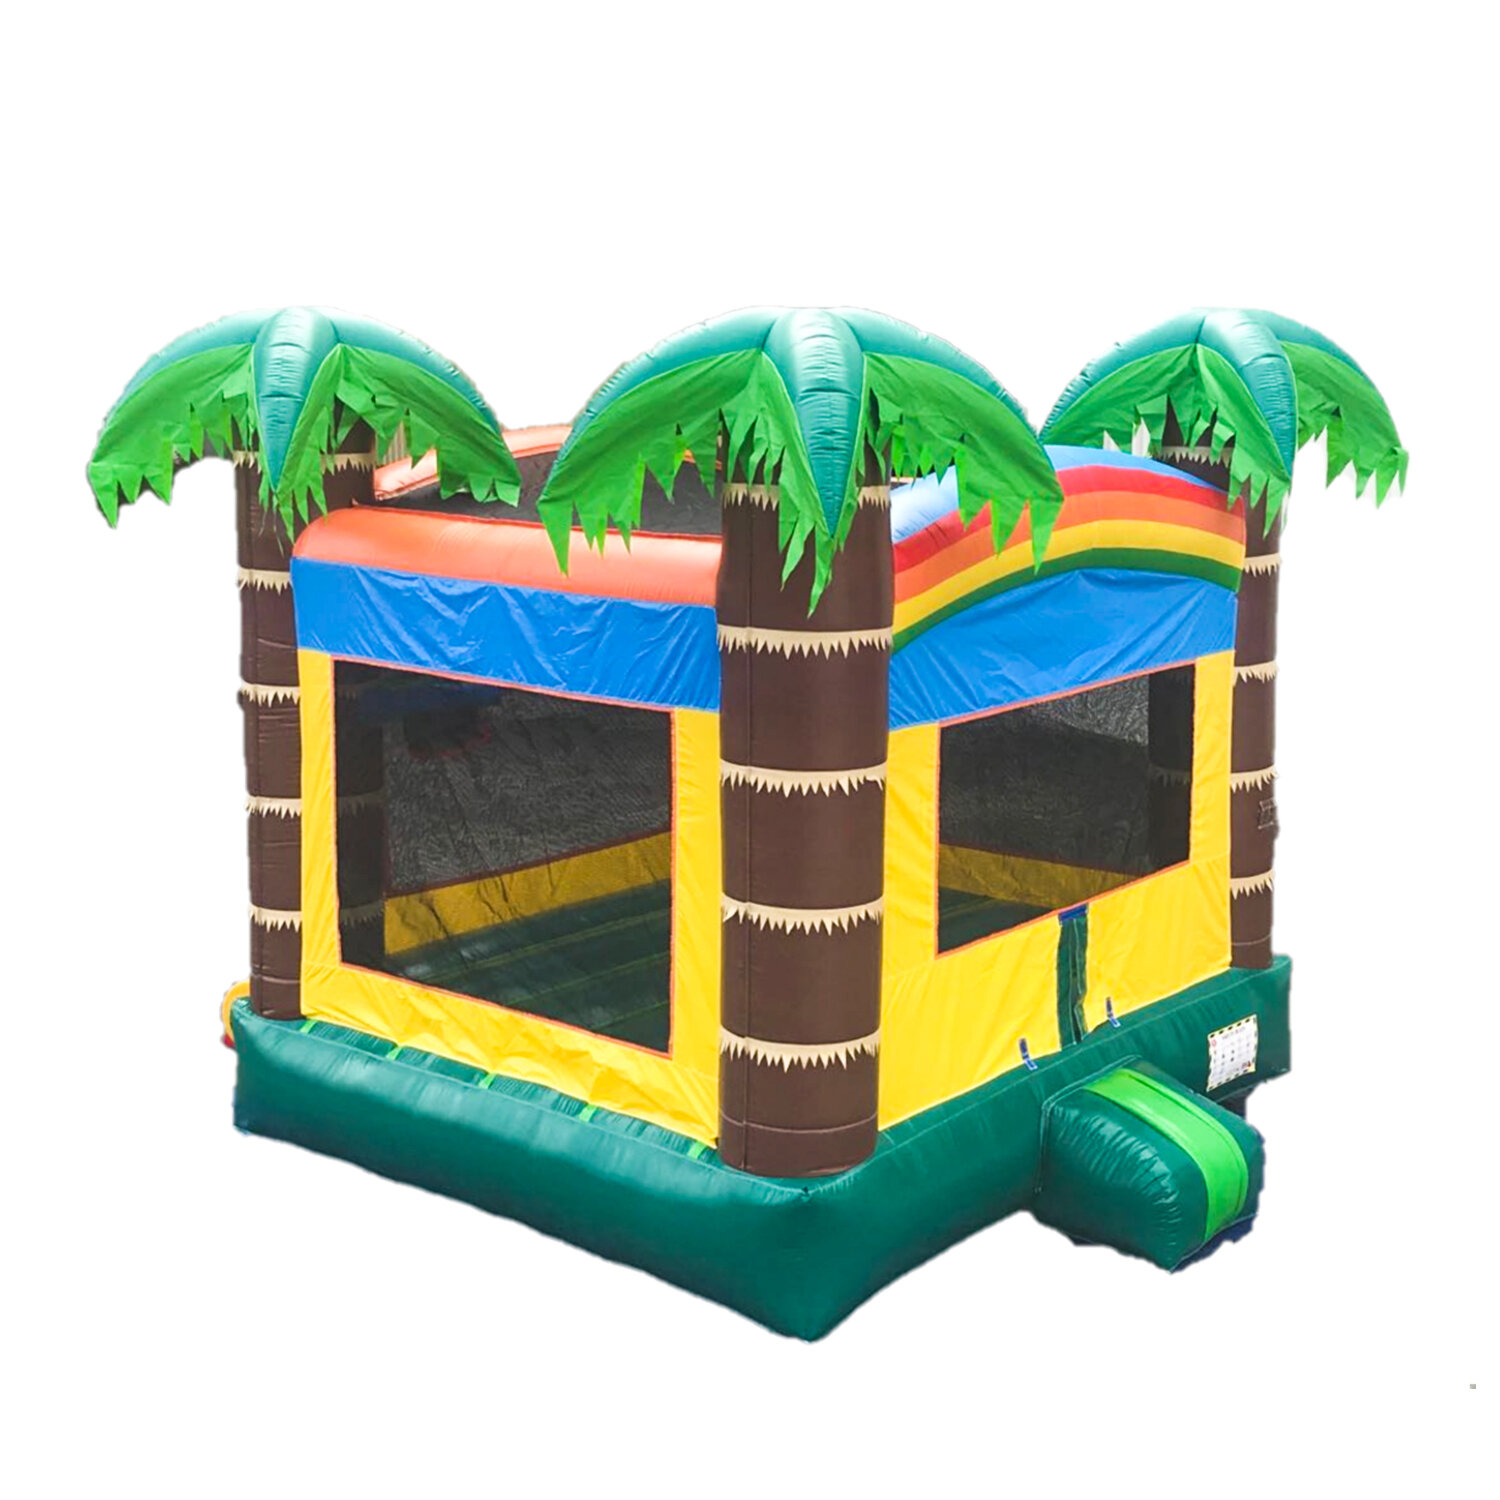 How Much Does Castle Inflatable Bounce House W Slide Service Cost? thumbnail